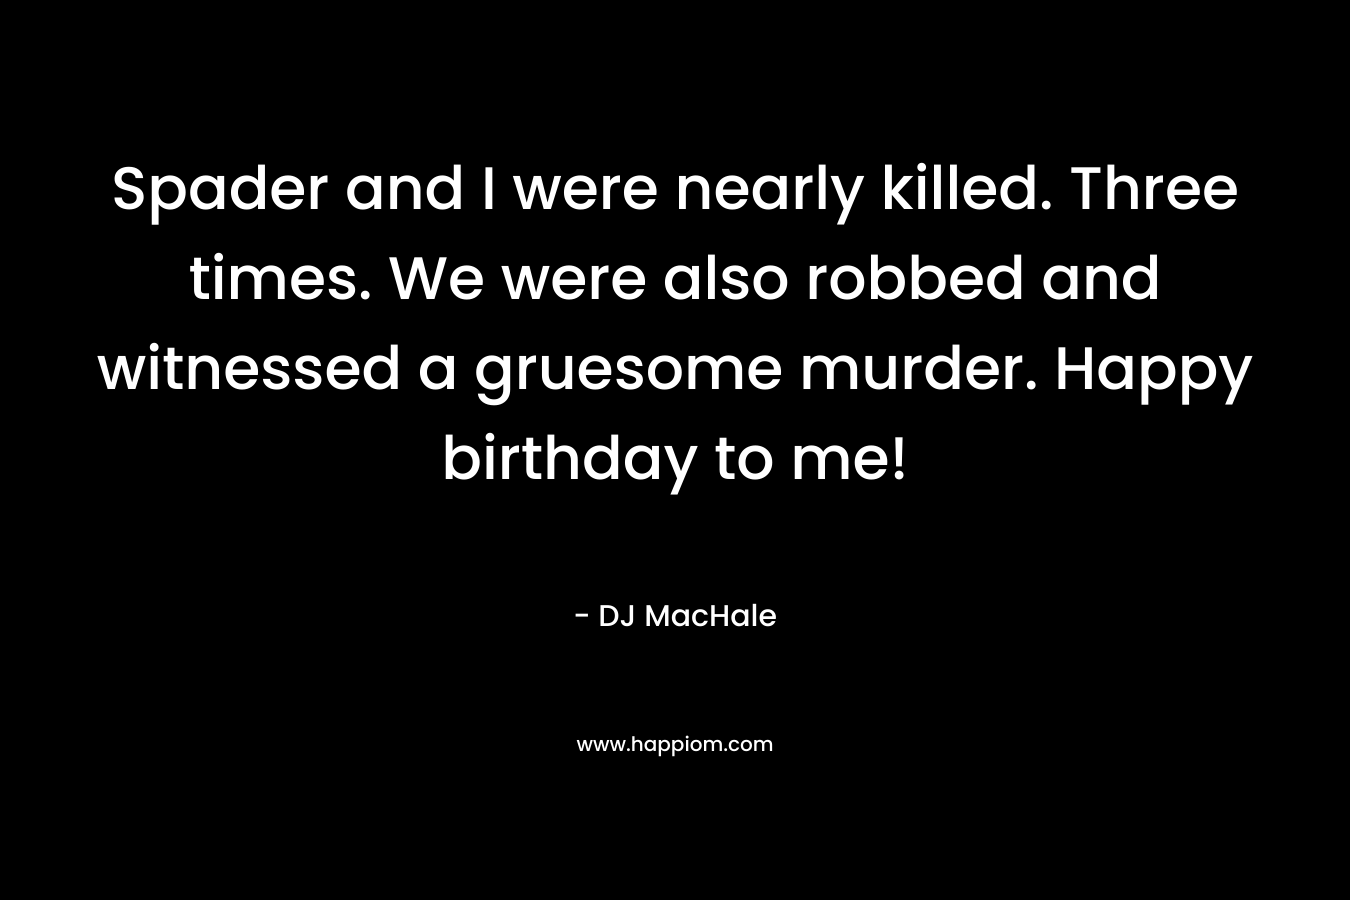 Spader and I were nearly killed. Three times. We were also robbed and witnessed a gruesome murder. Happy birthday to me! – DJ MacHale